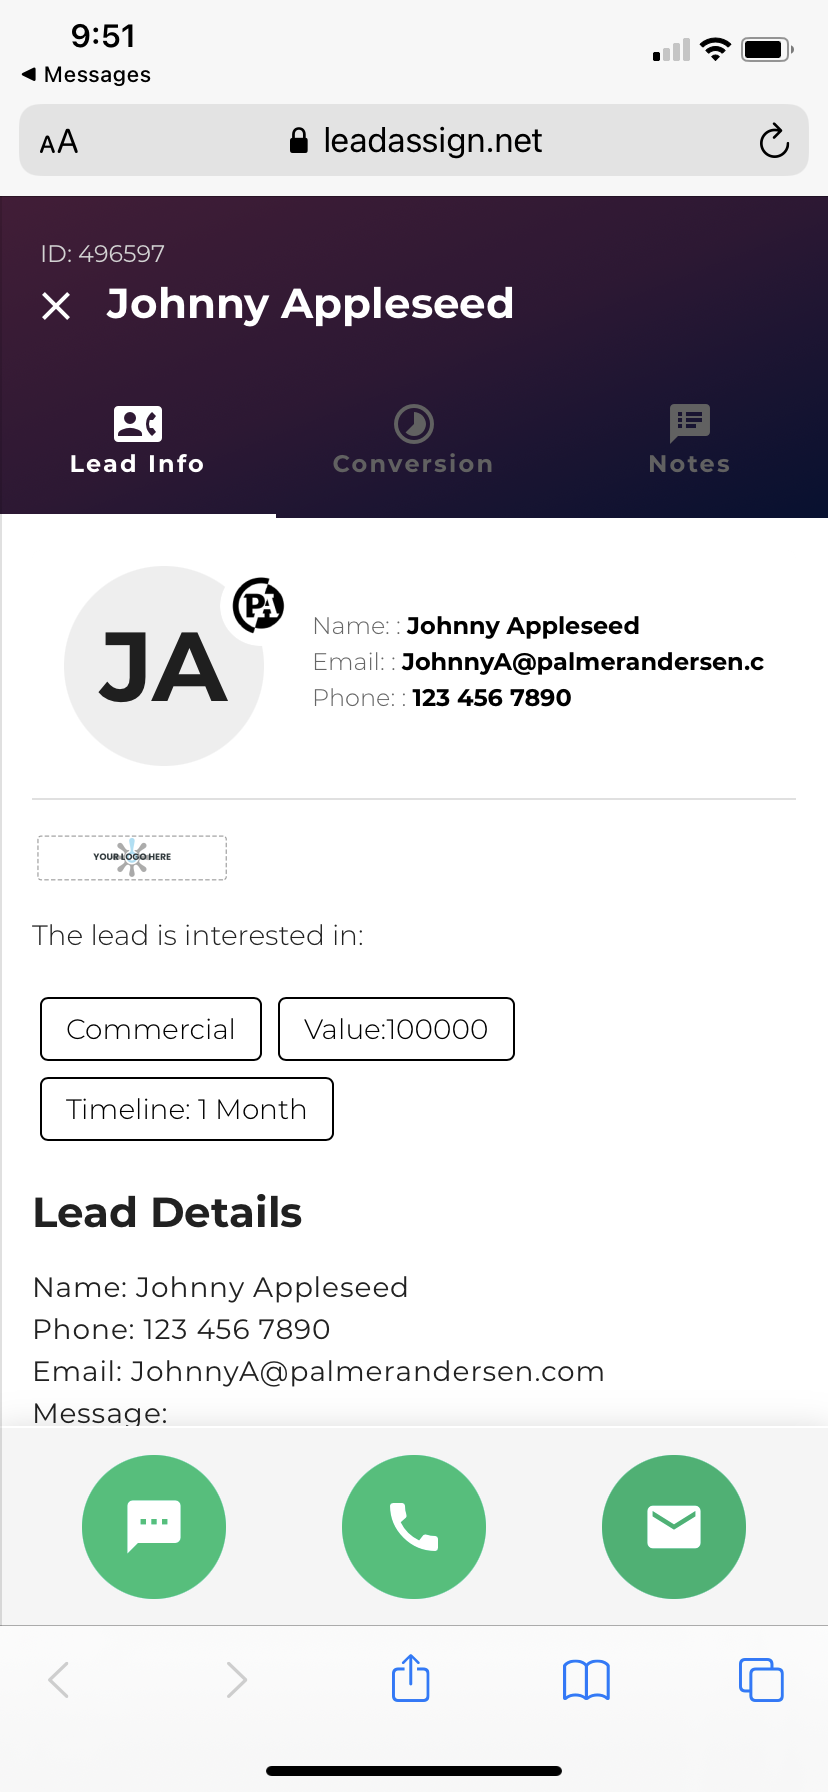 Mobile Lead - 02 Accepted